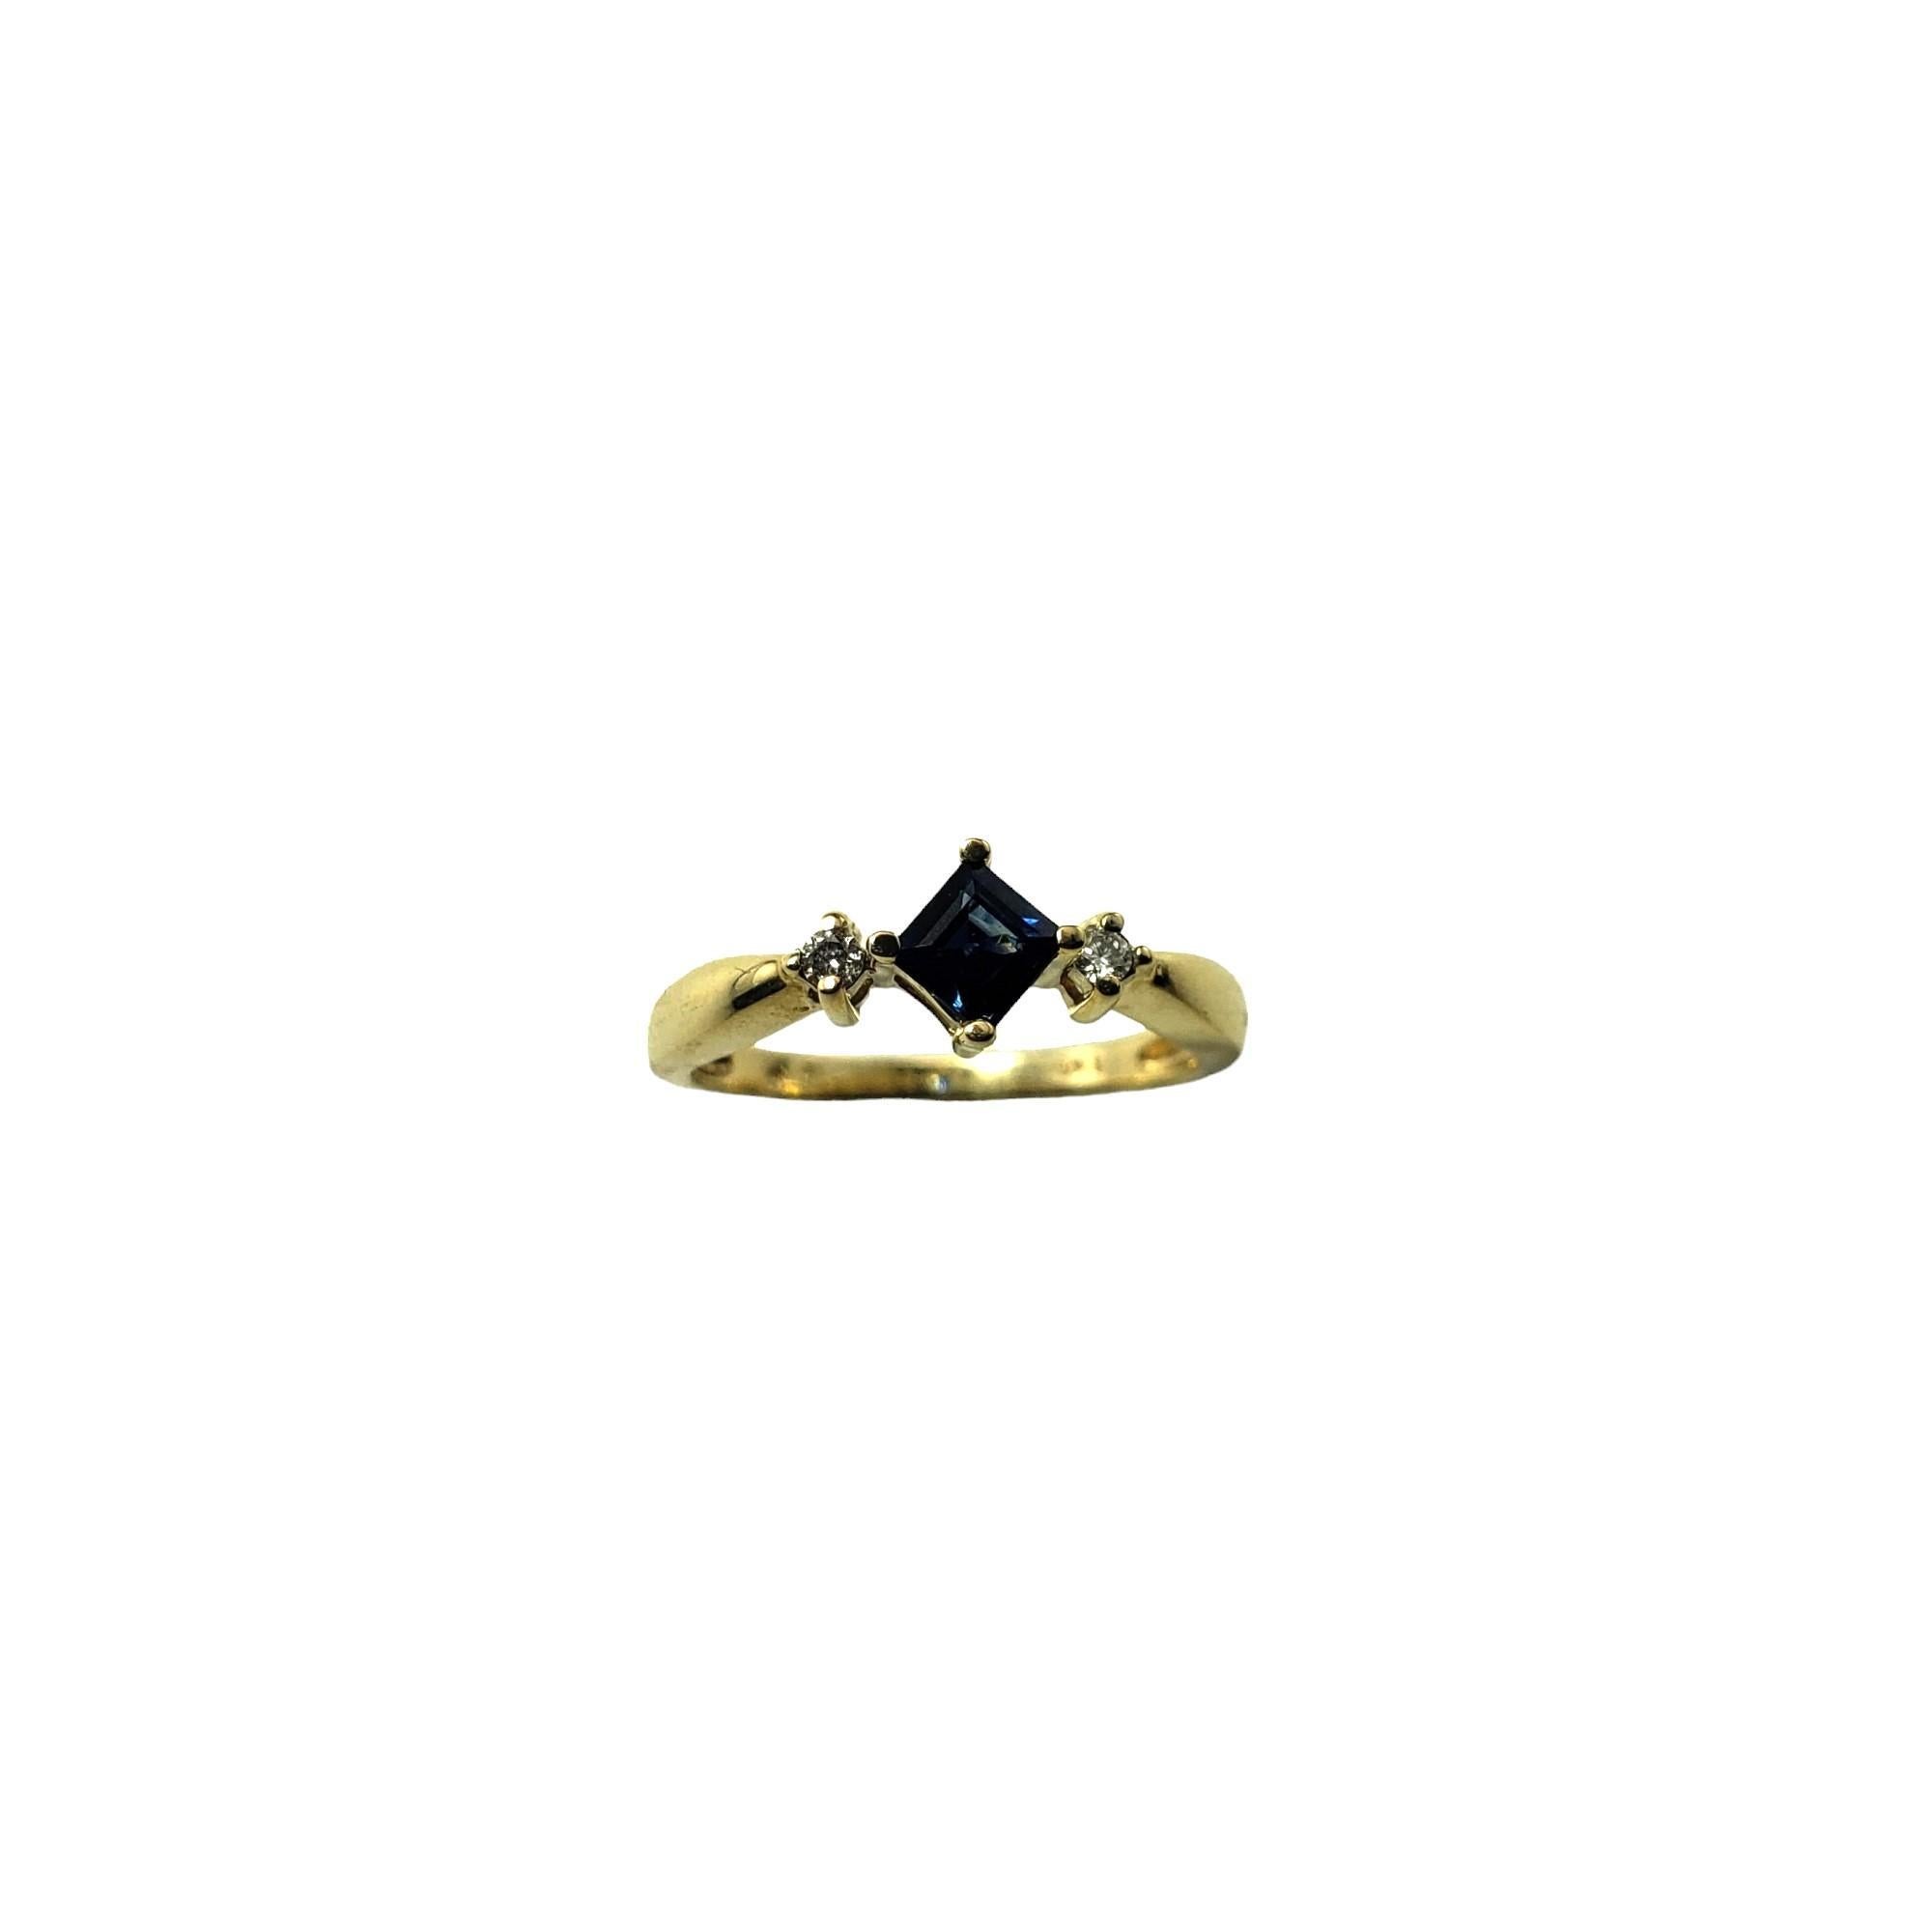 10 Karat Yellow Gold Sapphire and Diamond Ring Size 4.25 #15792 For Sale